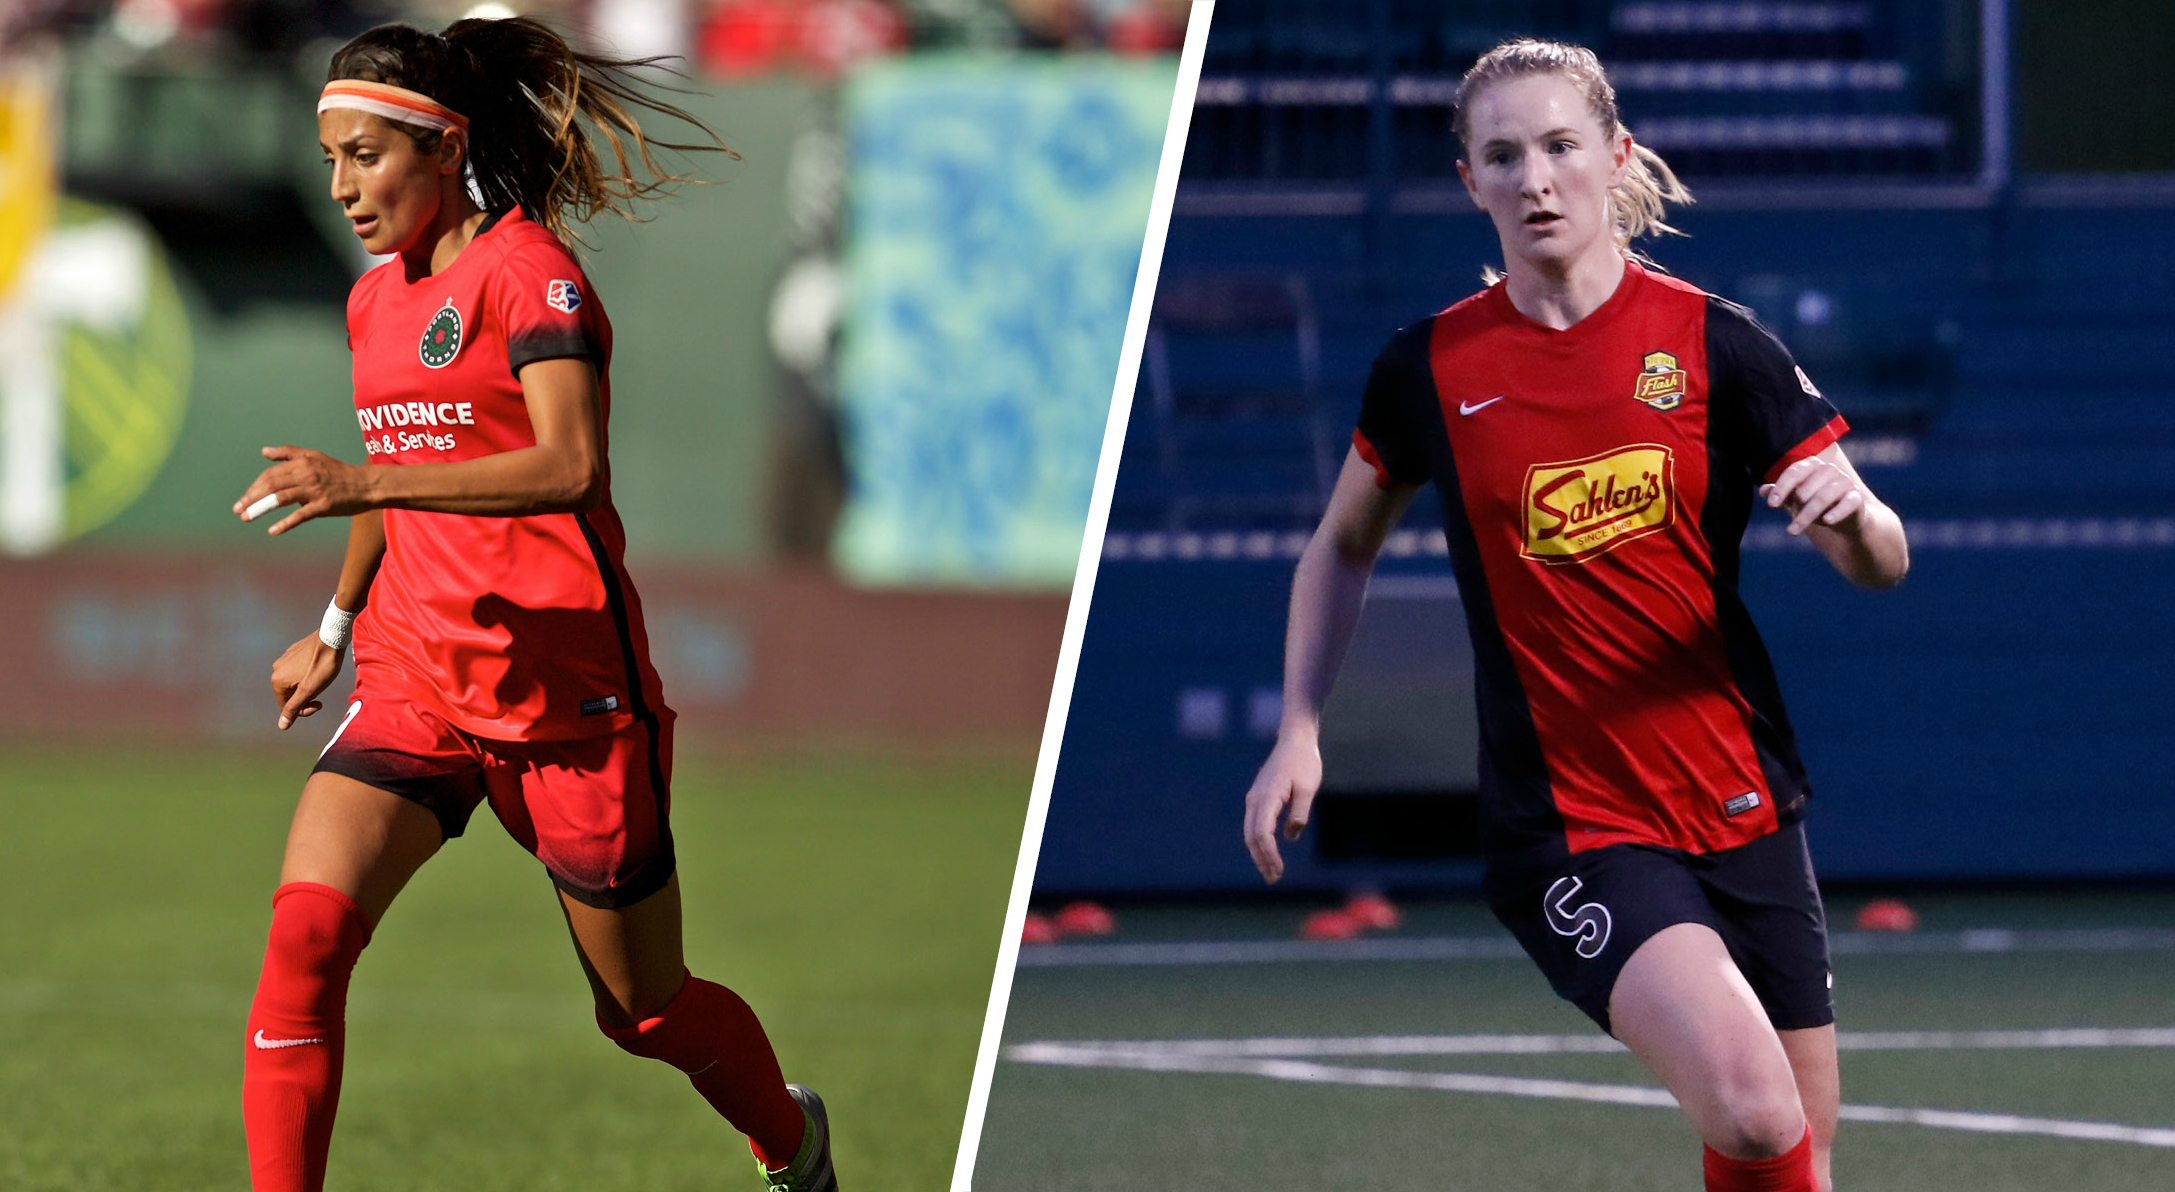 NWSL Soccer News: NWSL Playoff Action Kicks Off